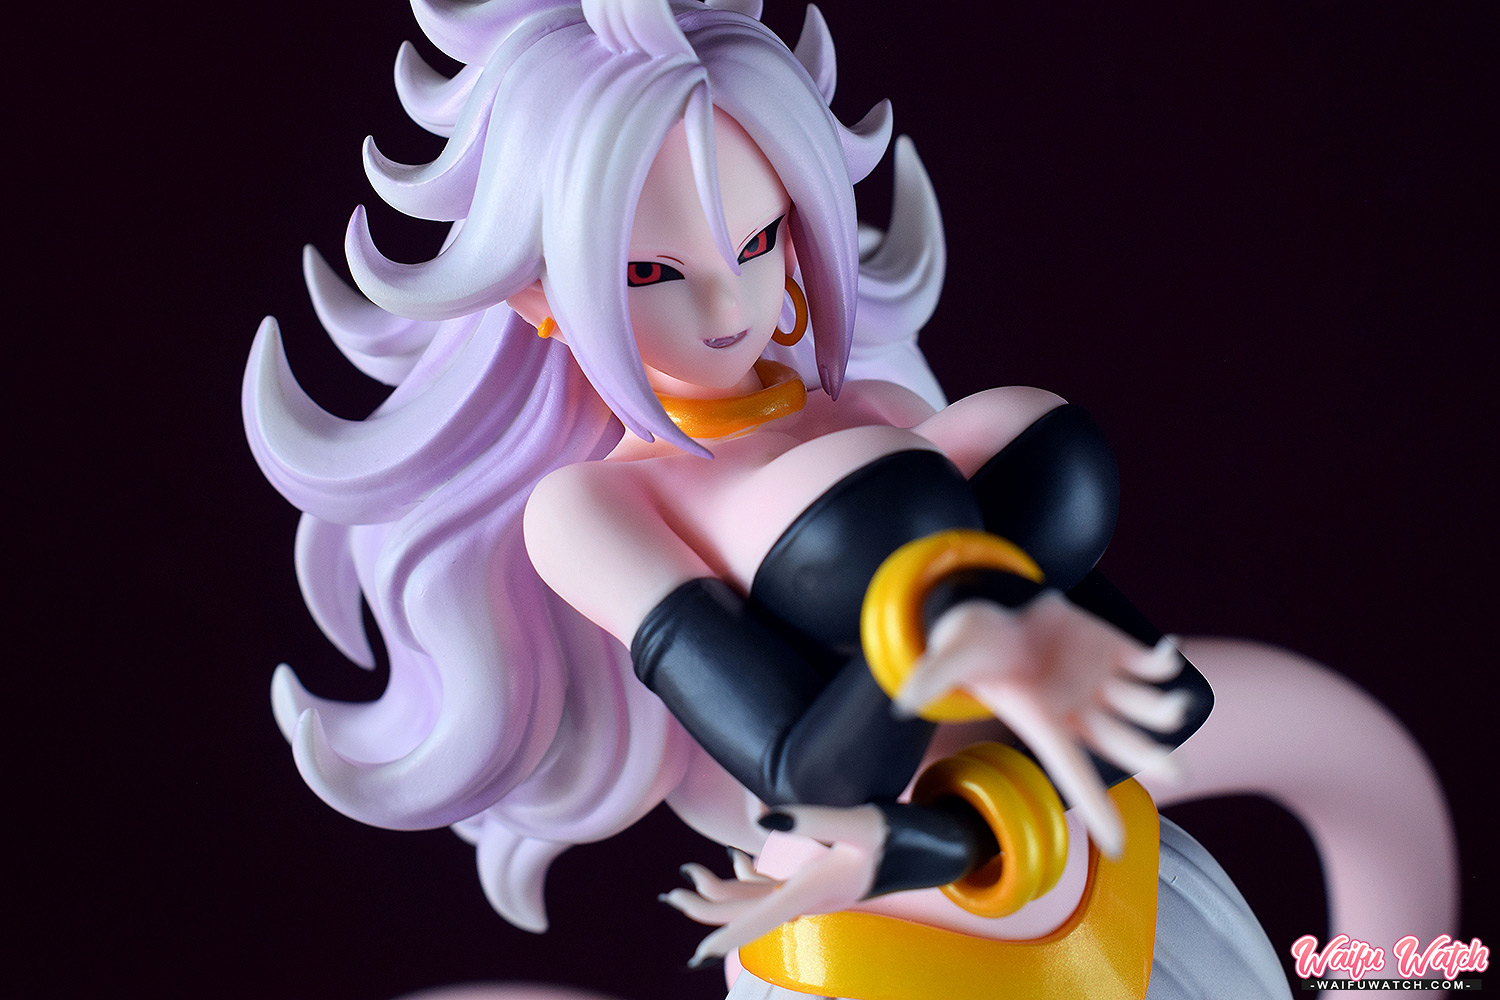 Android 21's 'human template' has been made canon in Dragon Ball